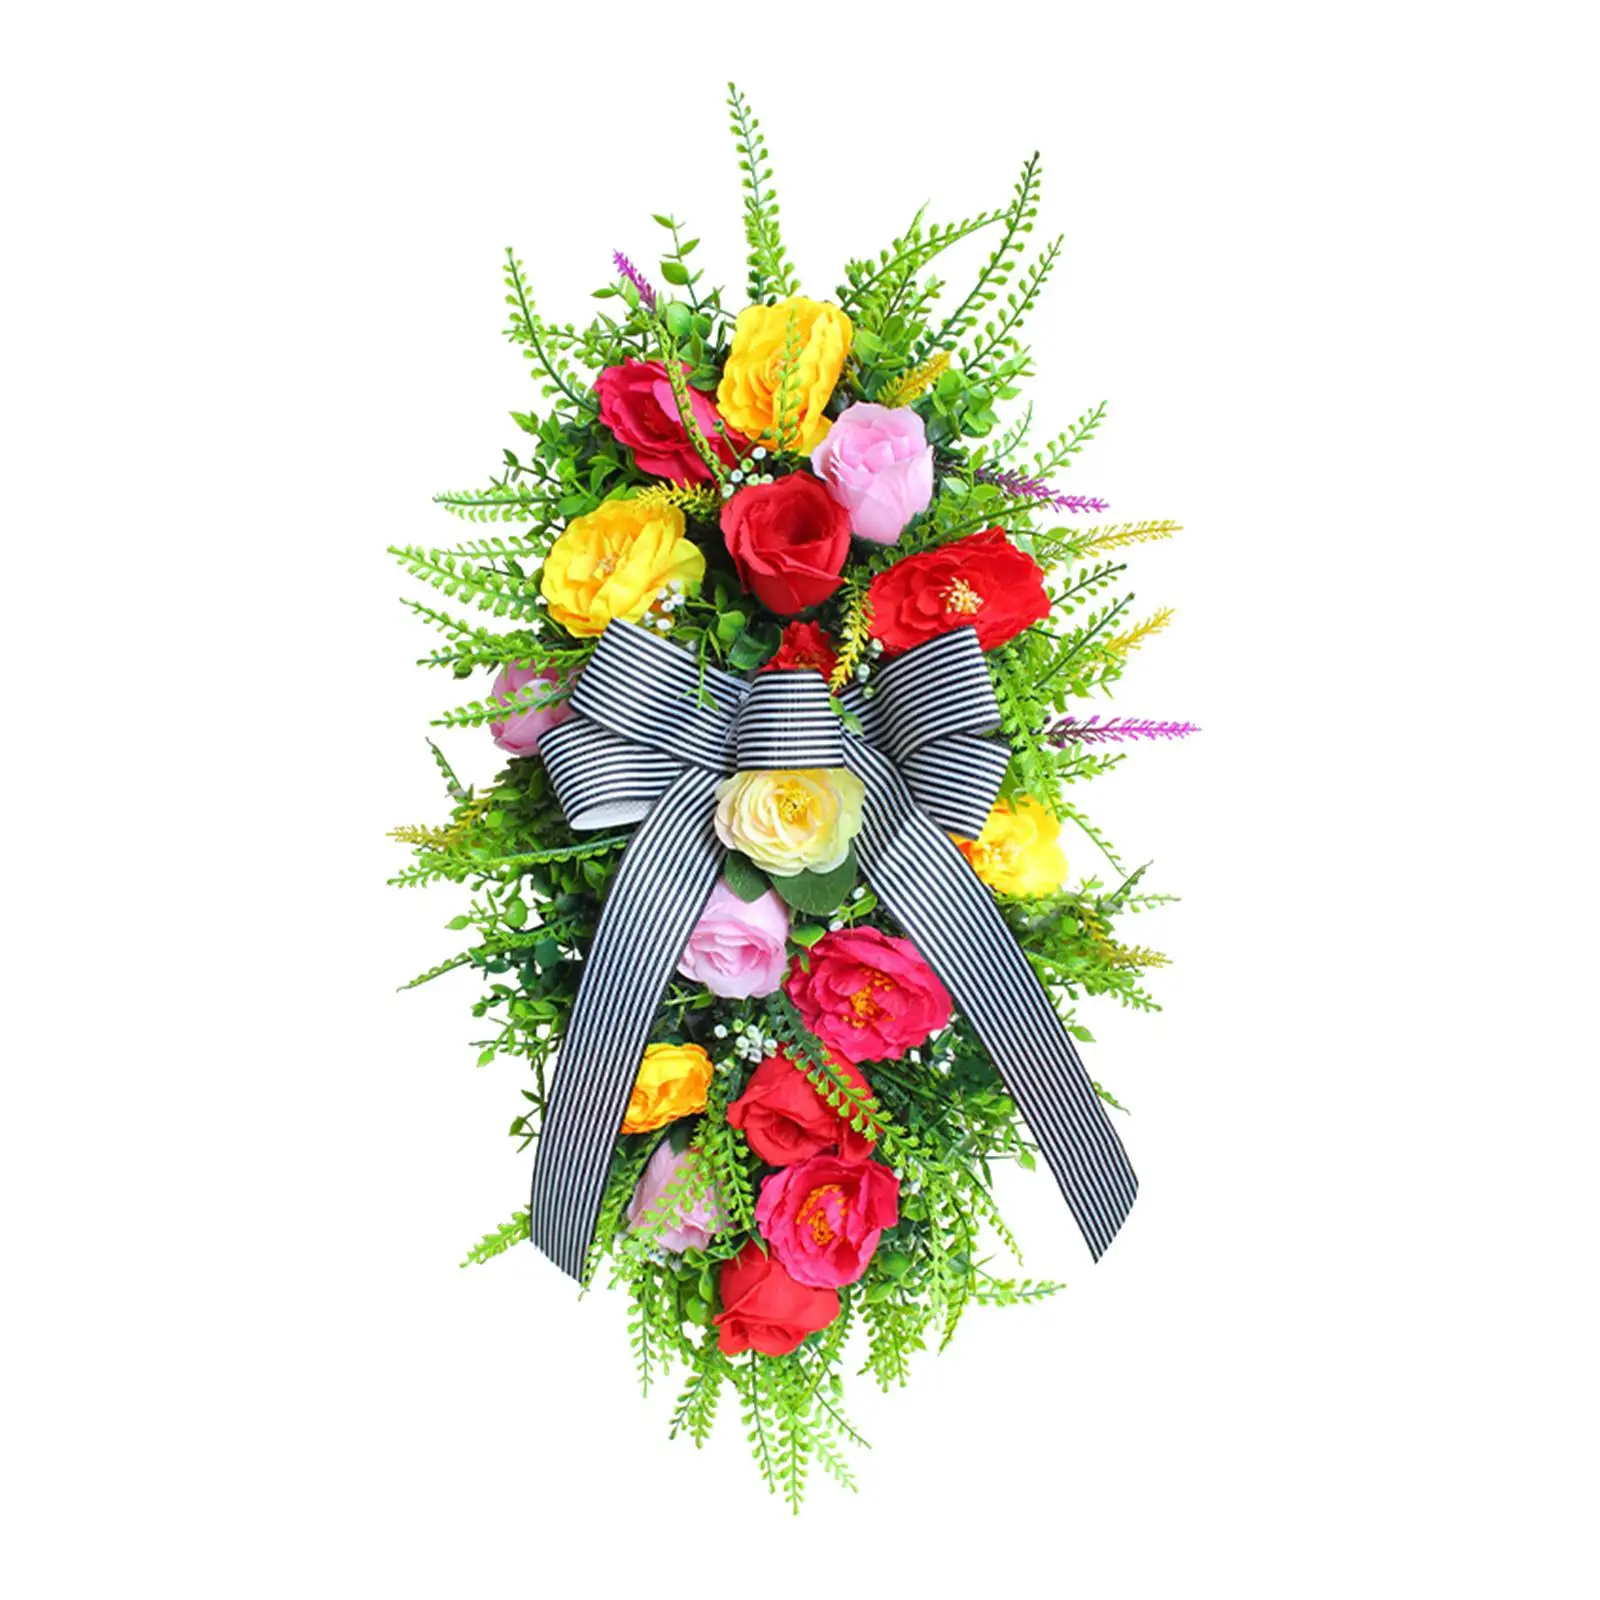 Door Swag Wreaths Floral Teardrop Swag Artificial Flower Wreath Hanging for Fireplace Festival Windows Housewarming Anniversary